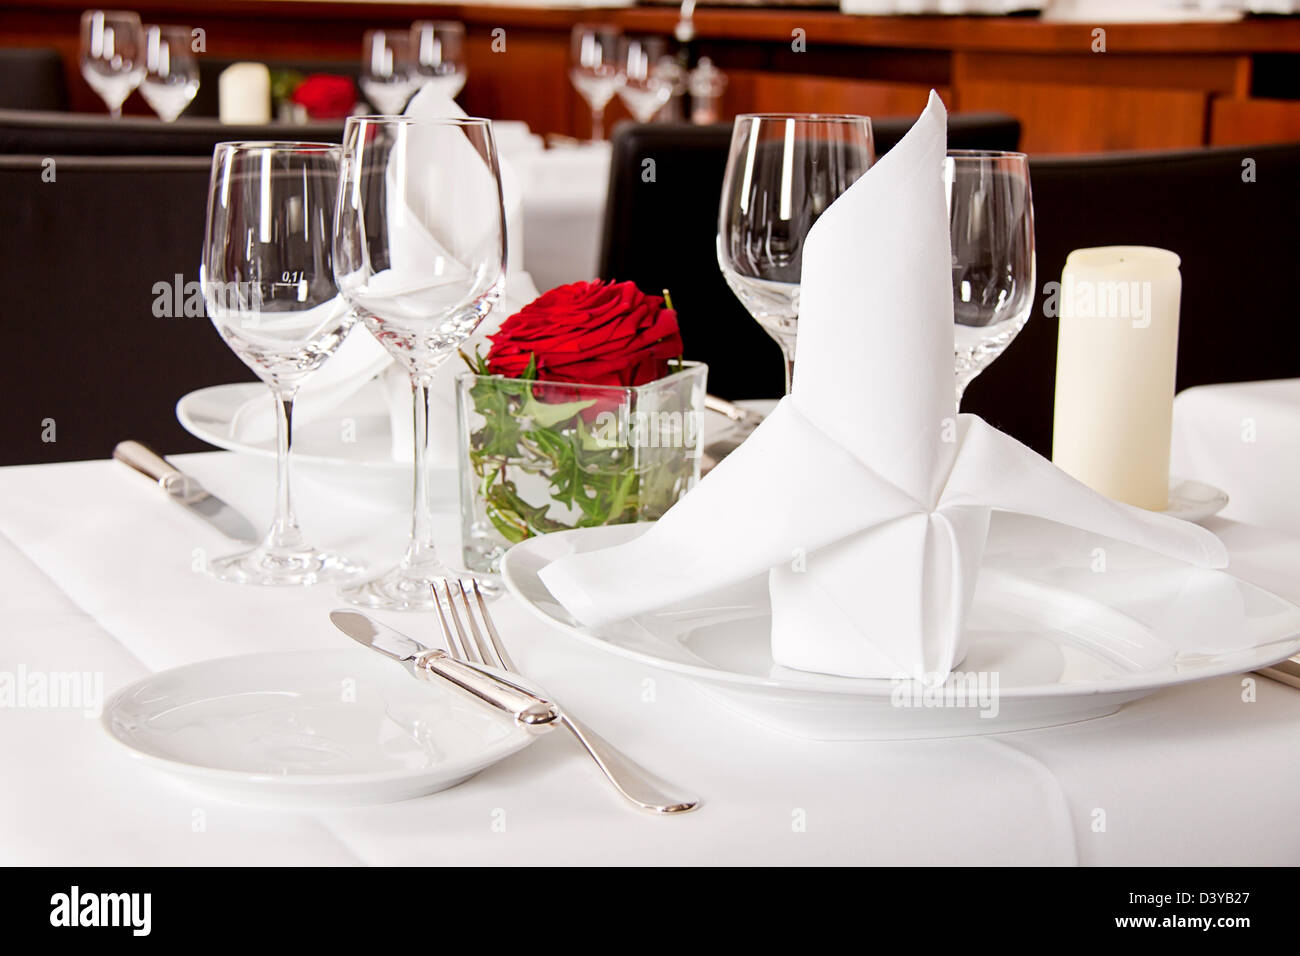 tables in restaurant with white tablecloth and elegant dish and silverwear Stock Photo